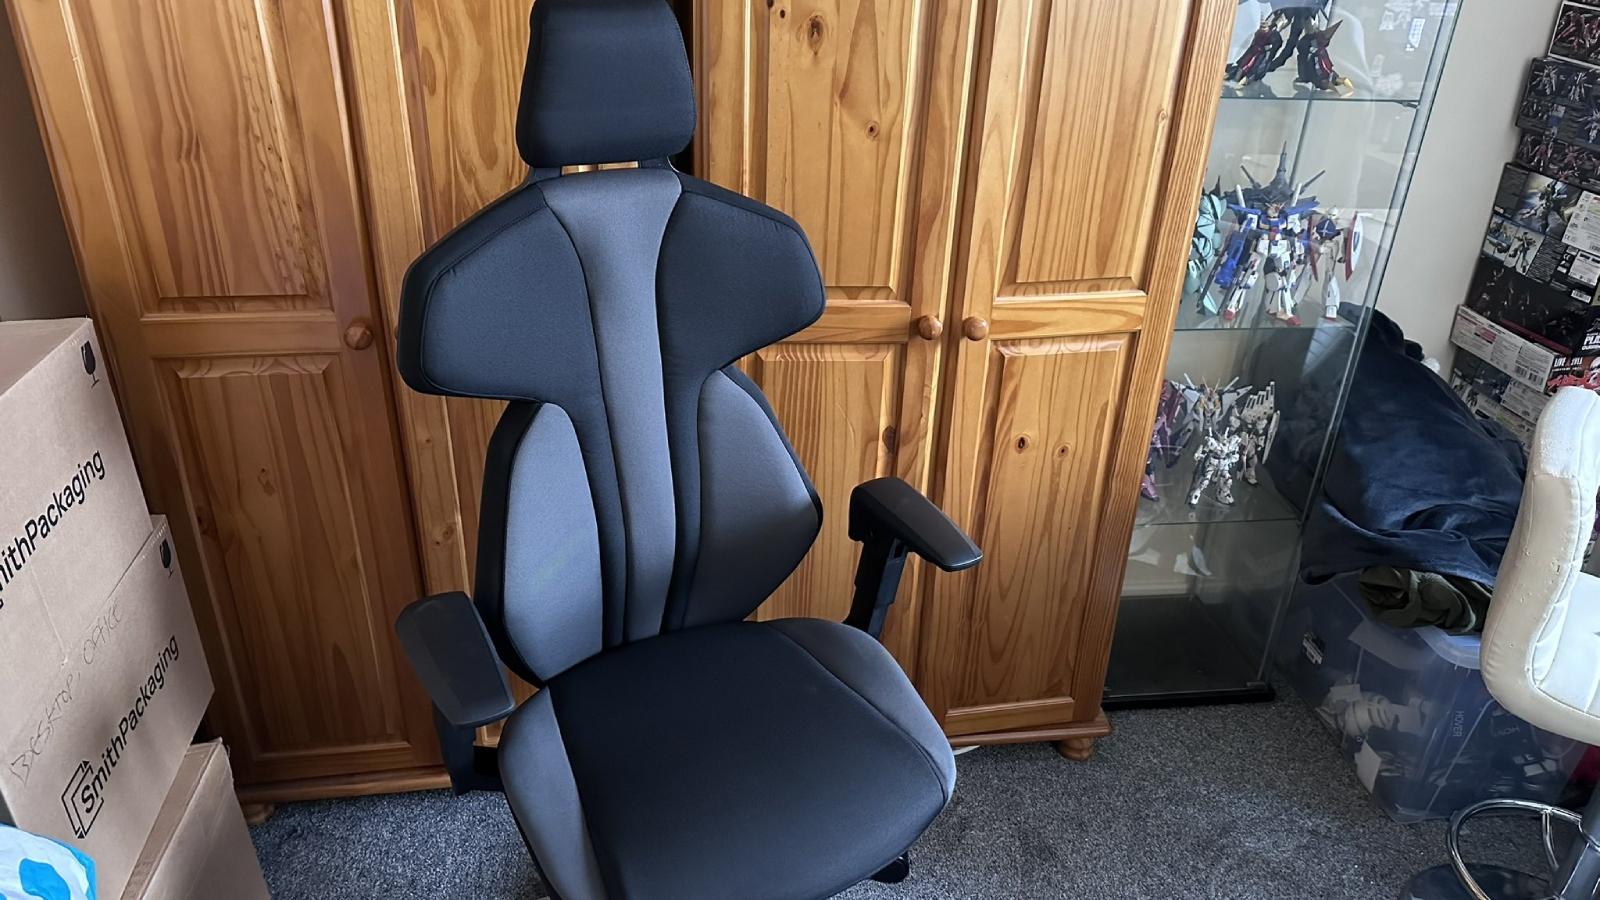 Sybr Si1 gaming chair in black inside a room